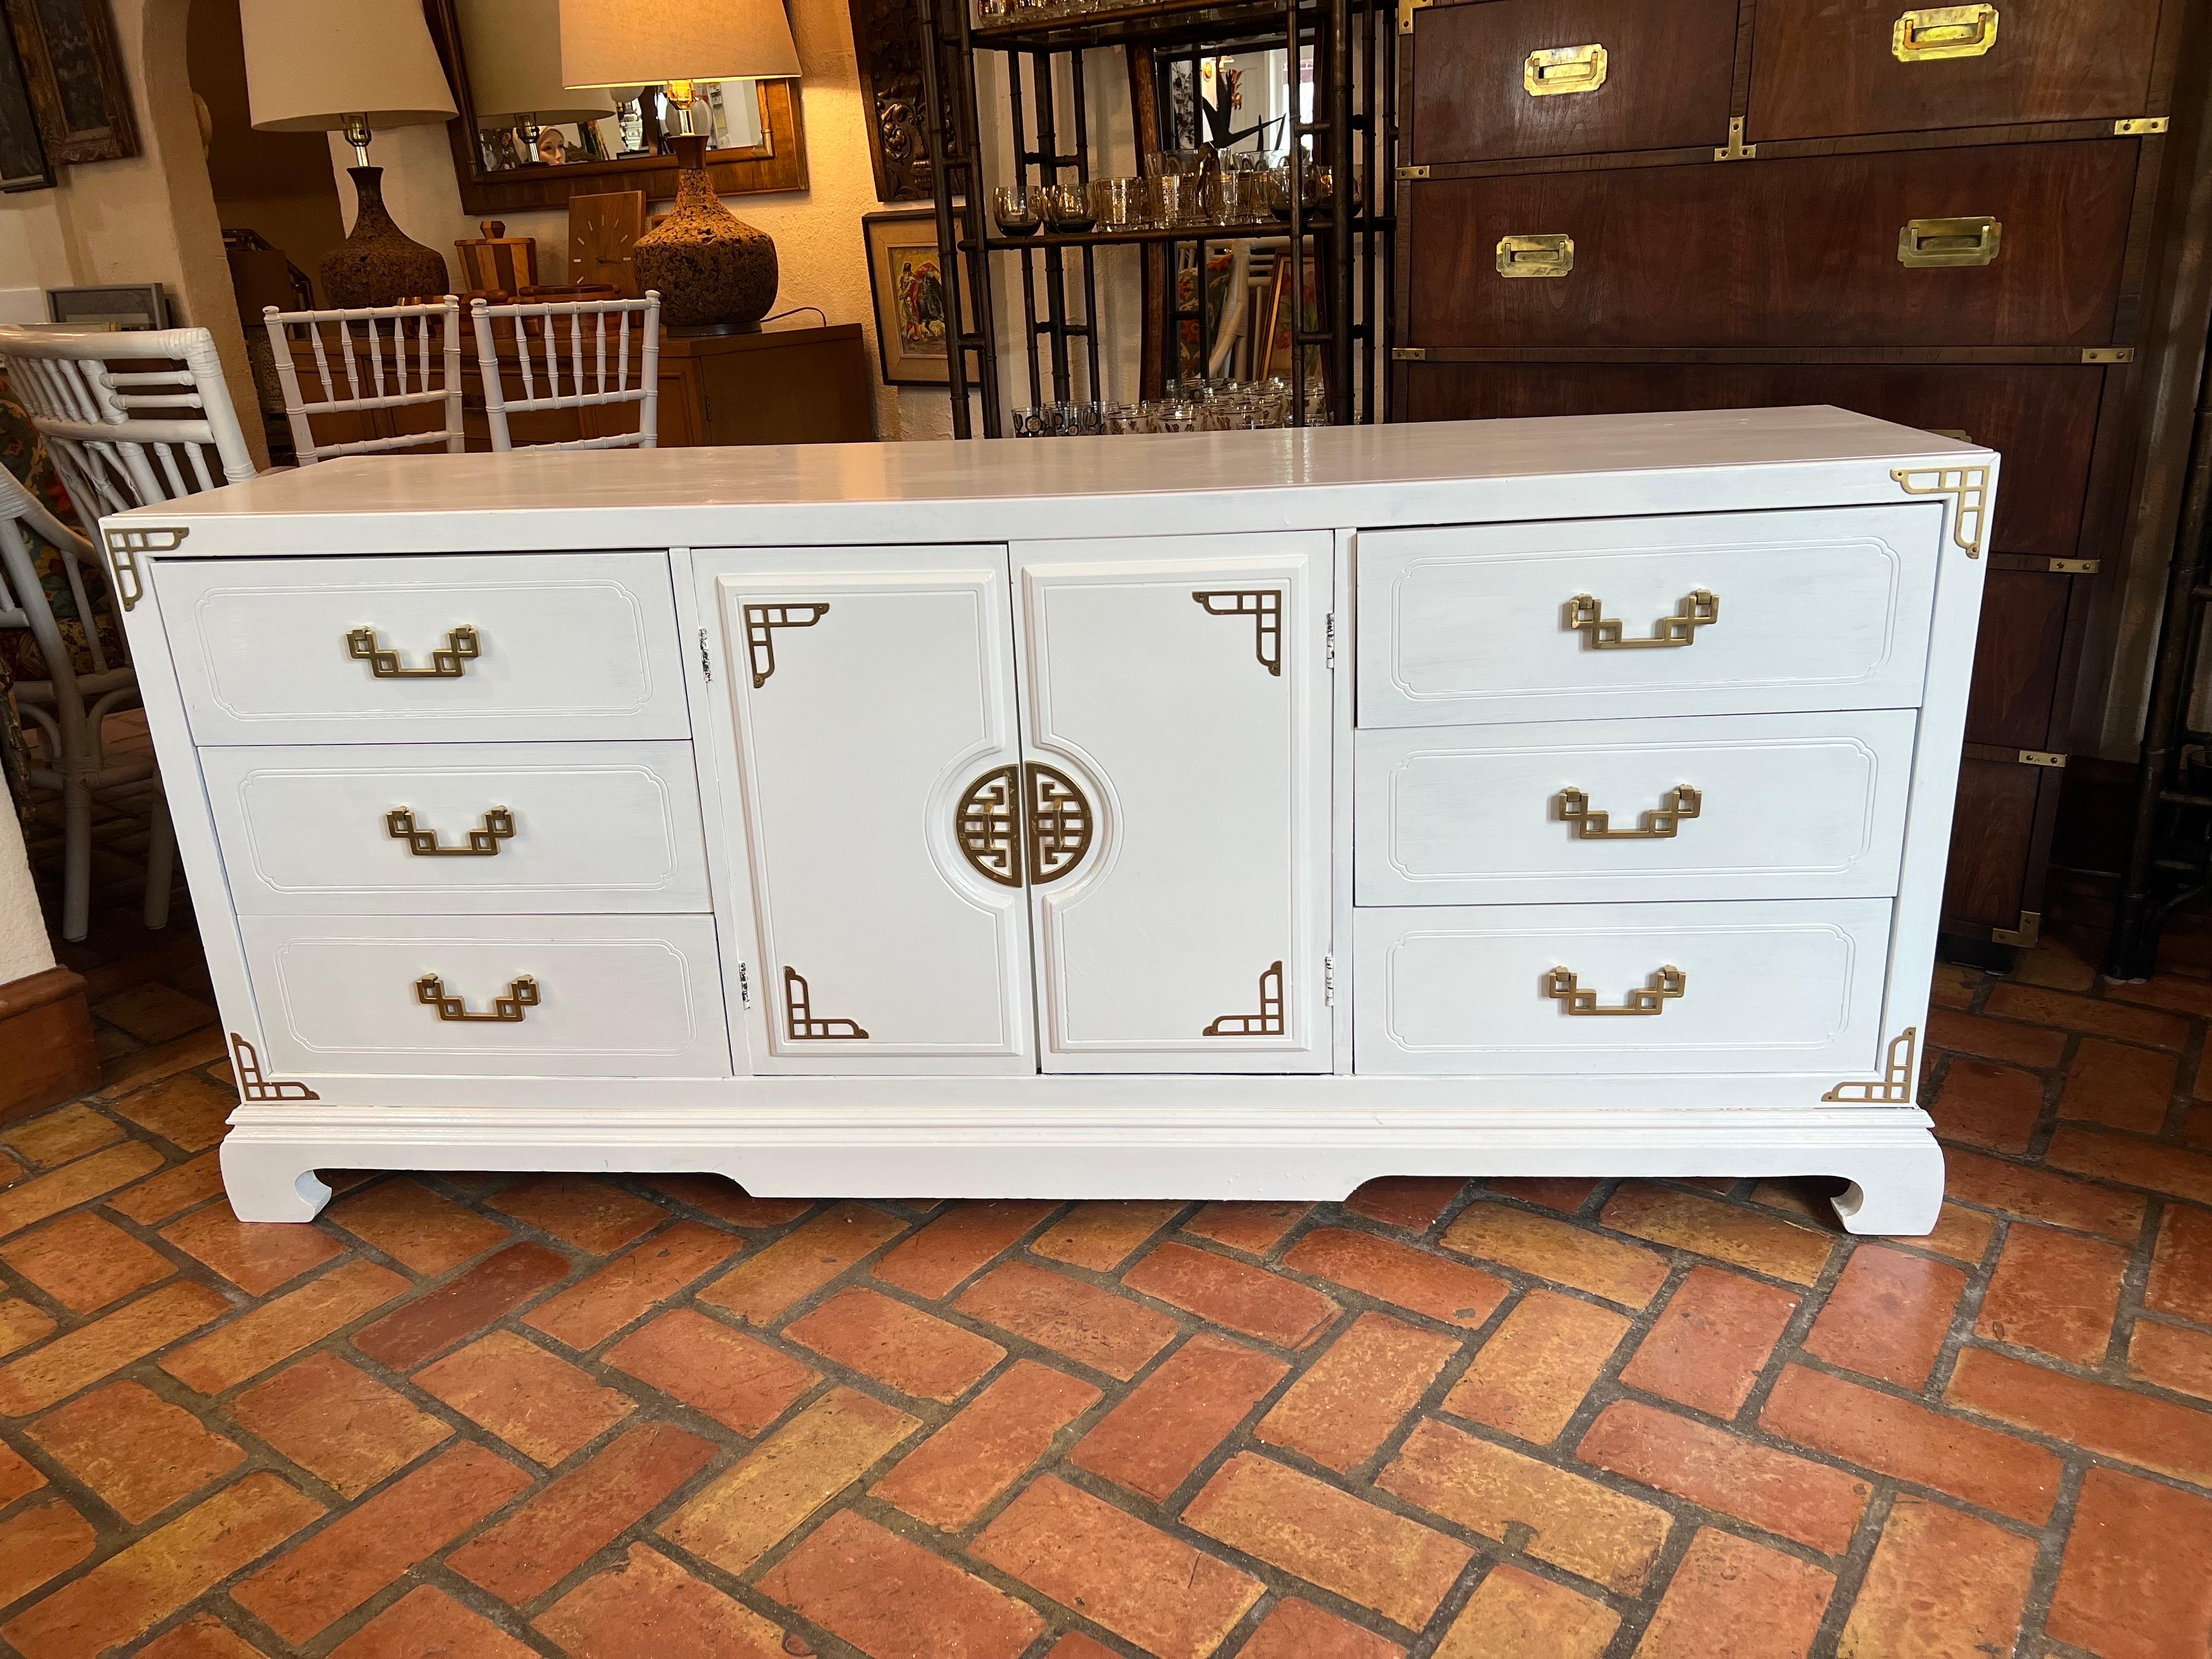 Mid-Century Modern white dresser or credenza by Bassett. Asian styling with curved Ming legs in front. In the style of Ray Sabota with its chunky brass hardware and Greek Key design. 
A statement piece for that bedroom or living space. Center